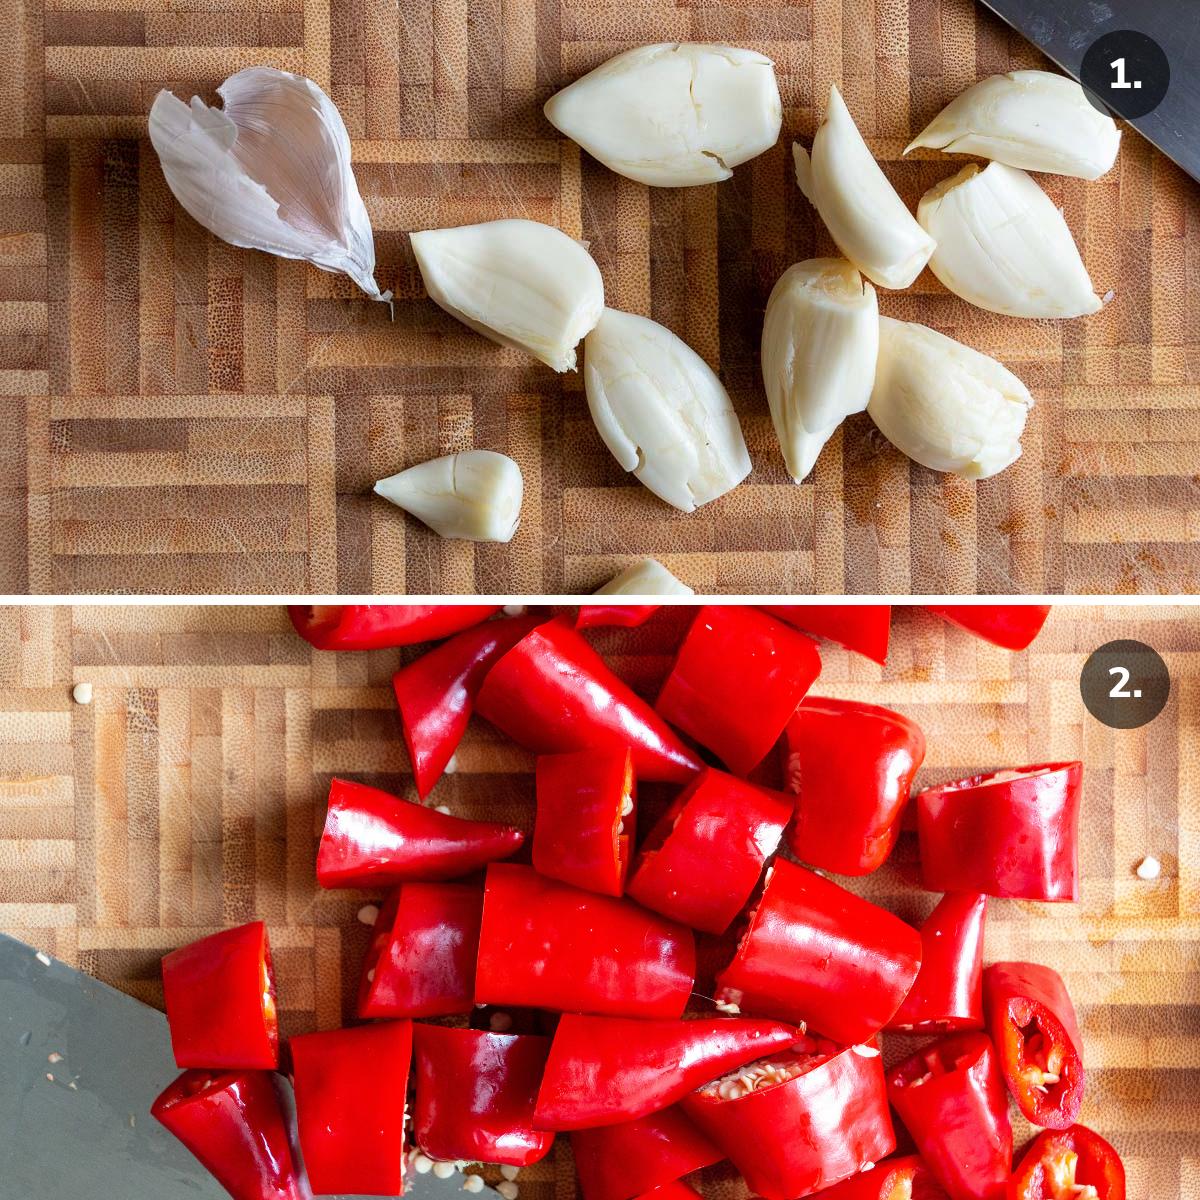 Removing the skin from garlic and chopping Fresno Chili Peppers.